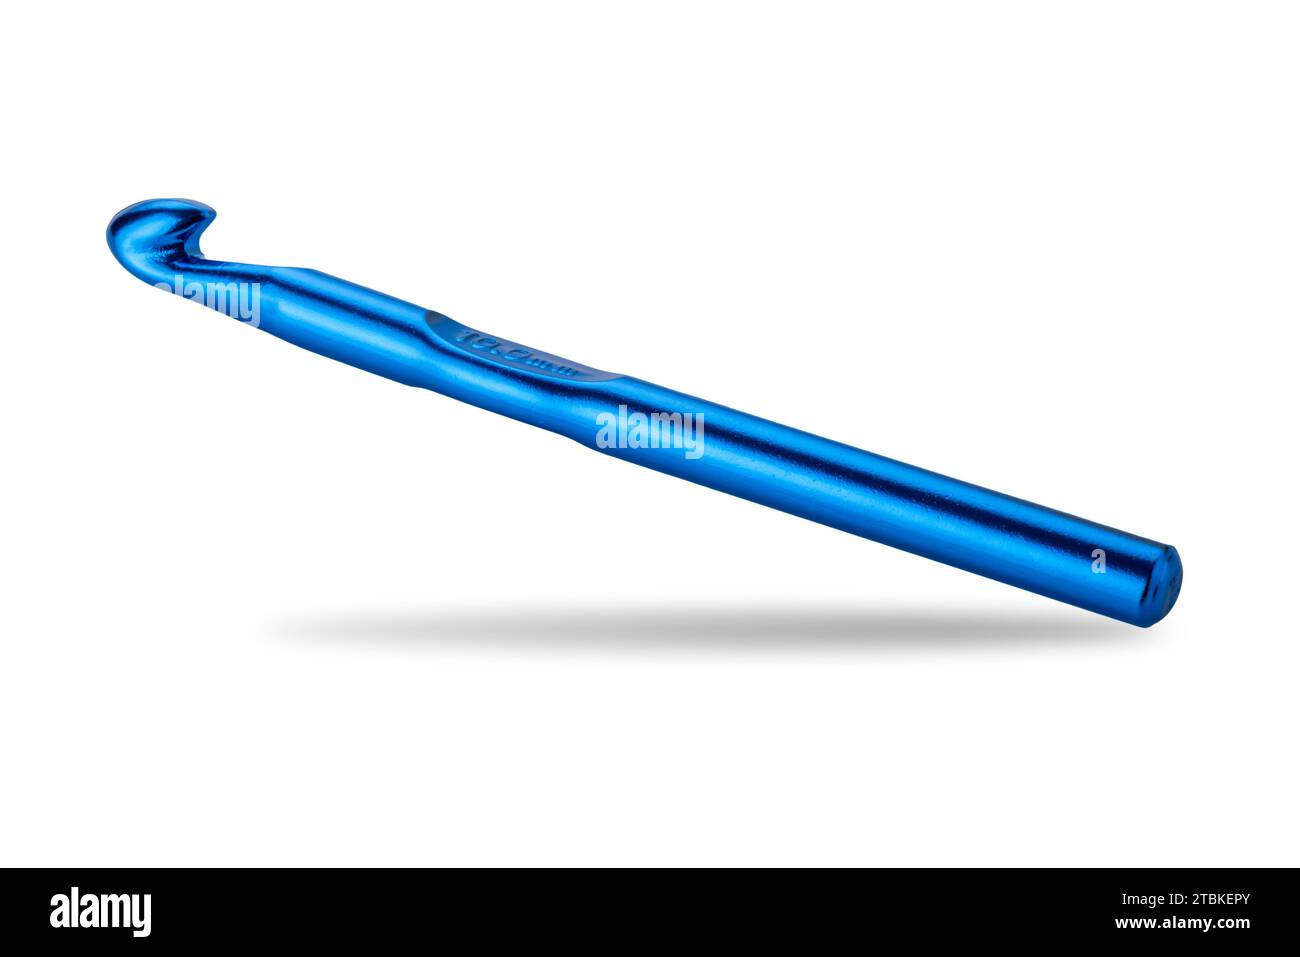 knitting weaving crochet hook 10 mm blue color isolated on white with clipping path included Stock Photo